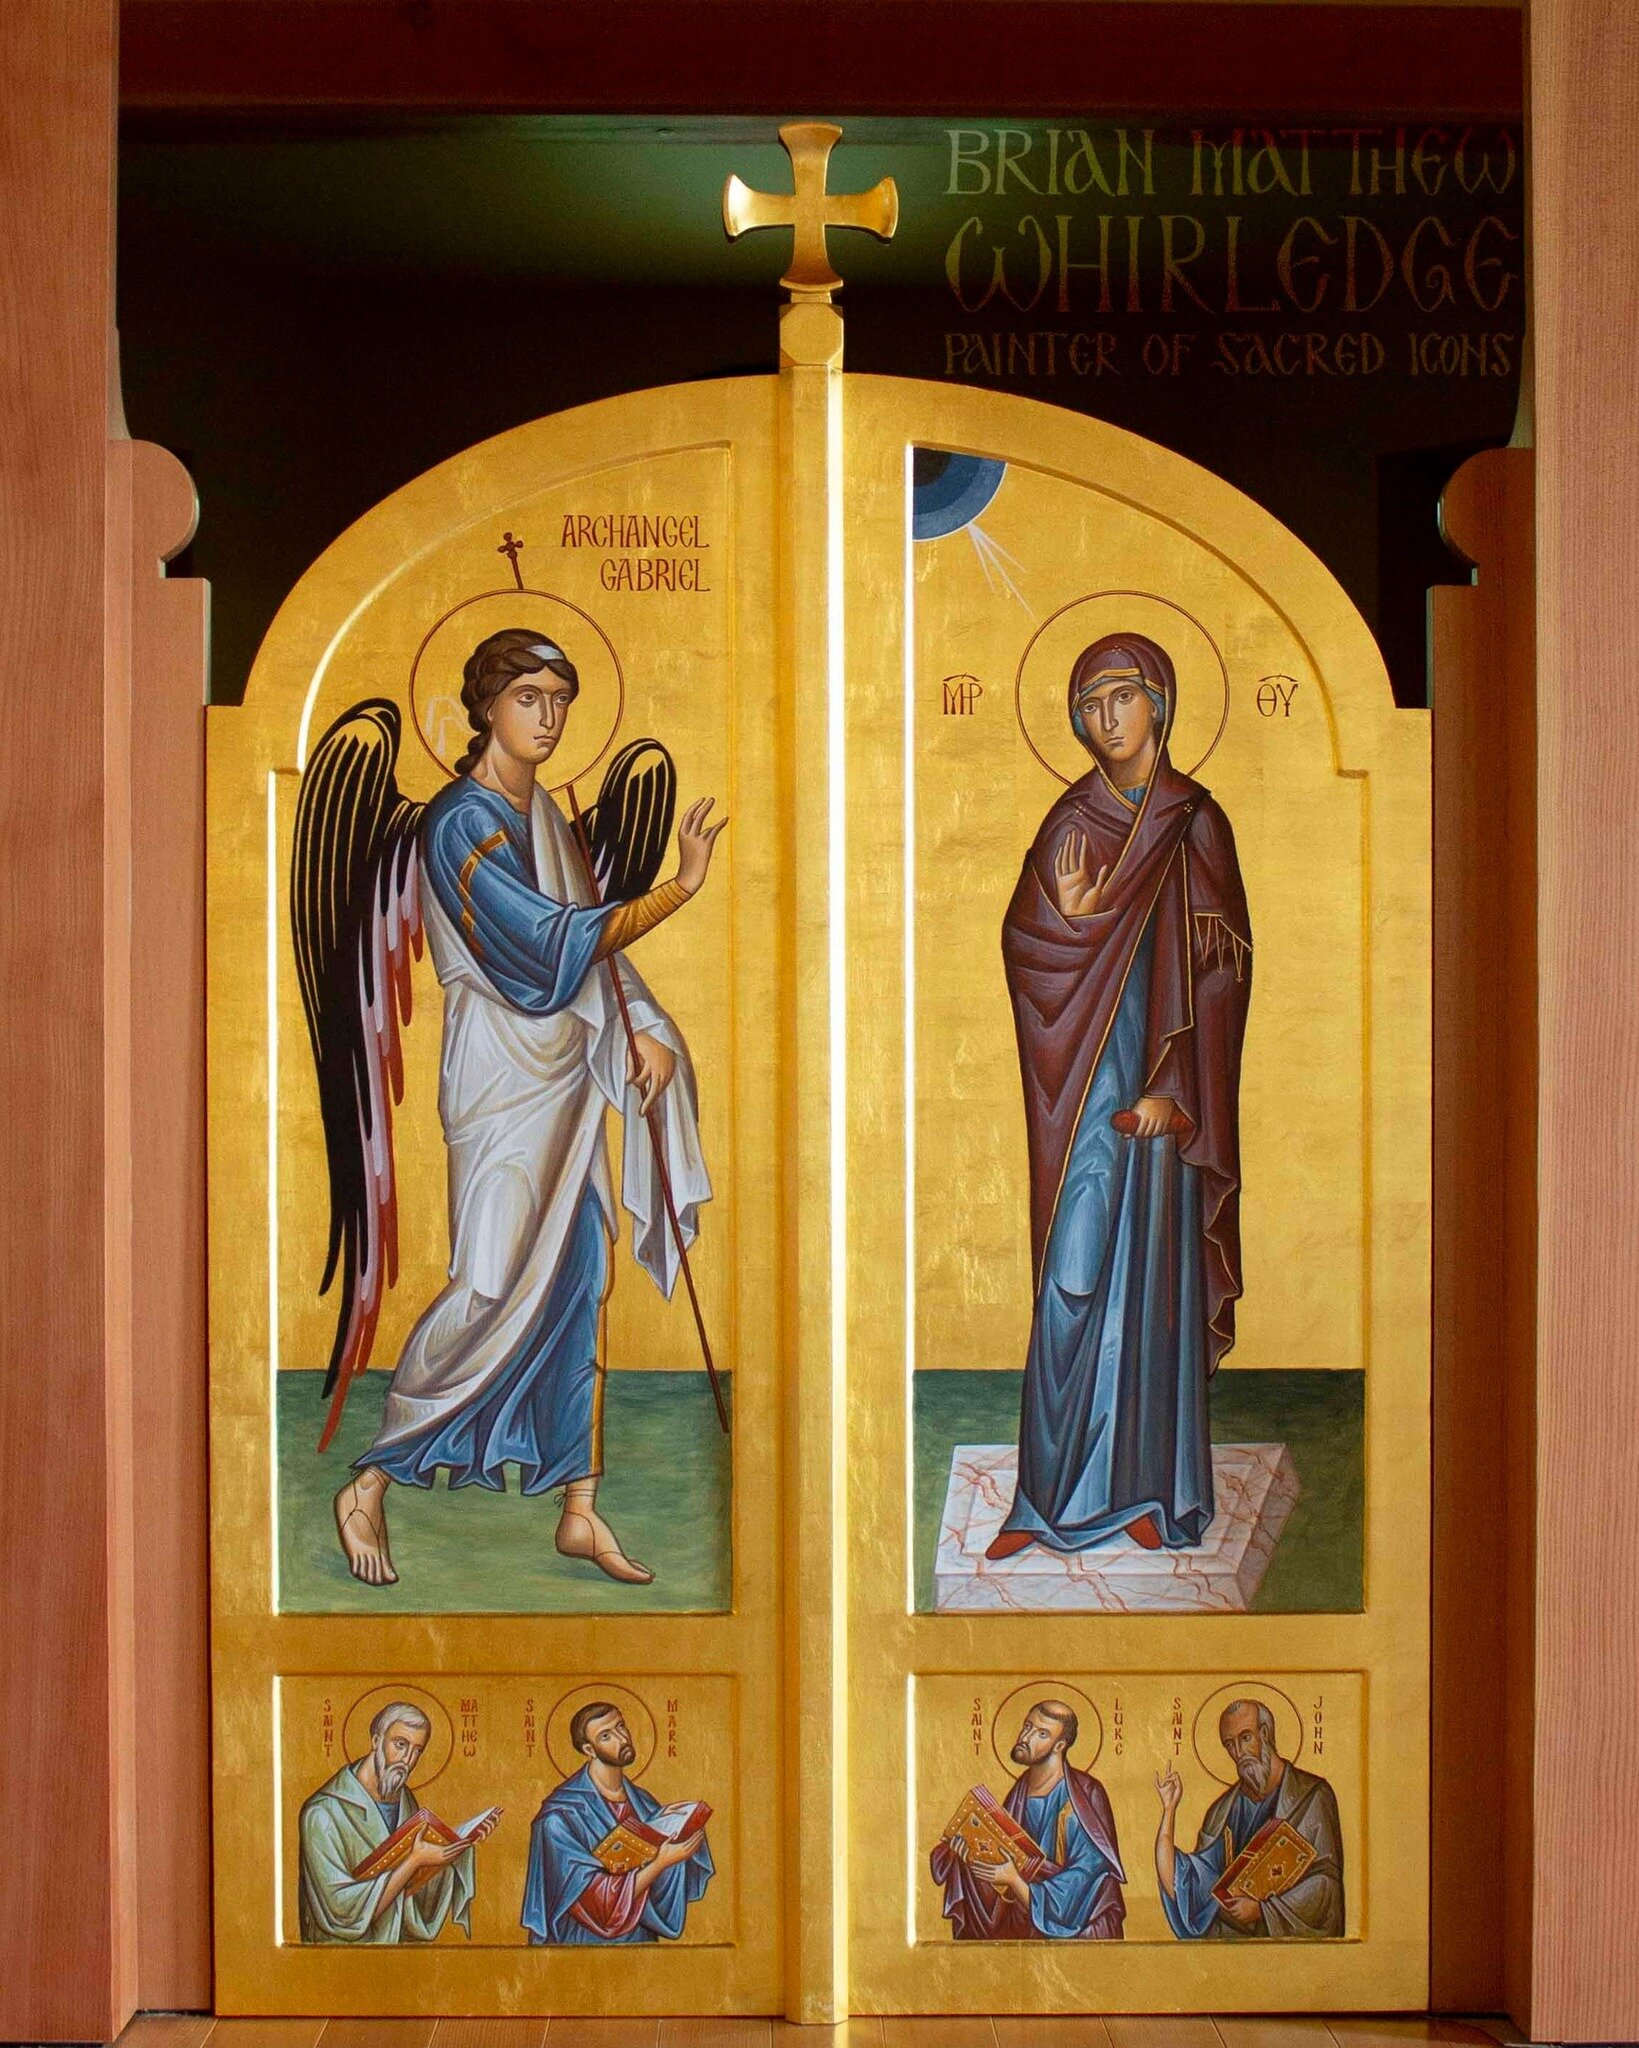 The Annunciation of the Most Holy Theotokos
.
In the sixth month the angel Gabriel was sent from God to a city of Galilee named Nazareth, to a virgin betrothed to a man whose name was Joseph, of the house of David; and the virgin's name was Mary. And